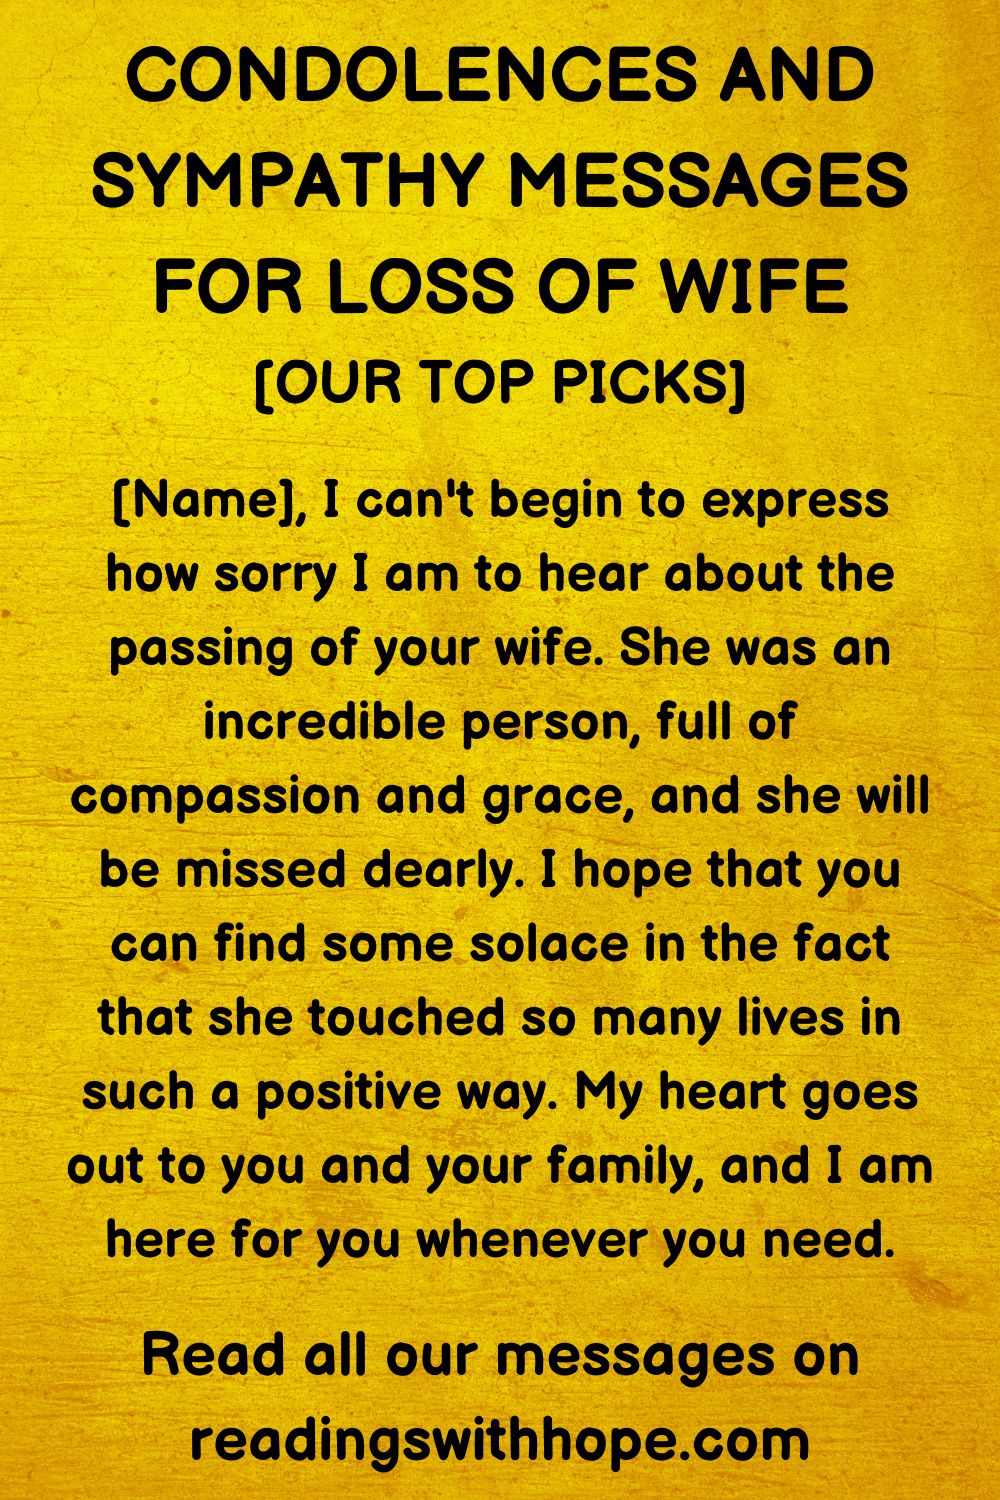 Condolences and Sympathy Message for Loss of Wife
